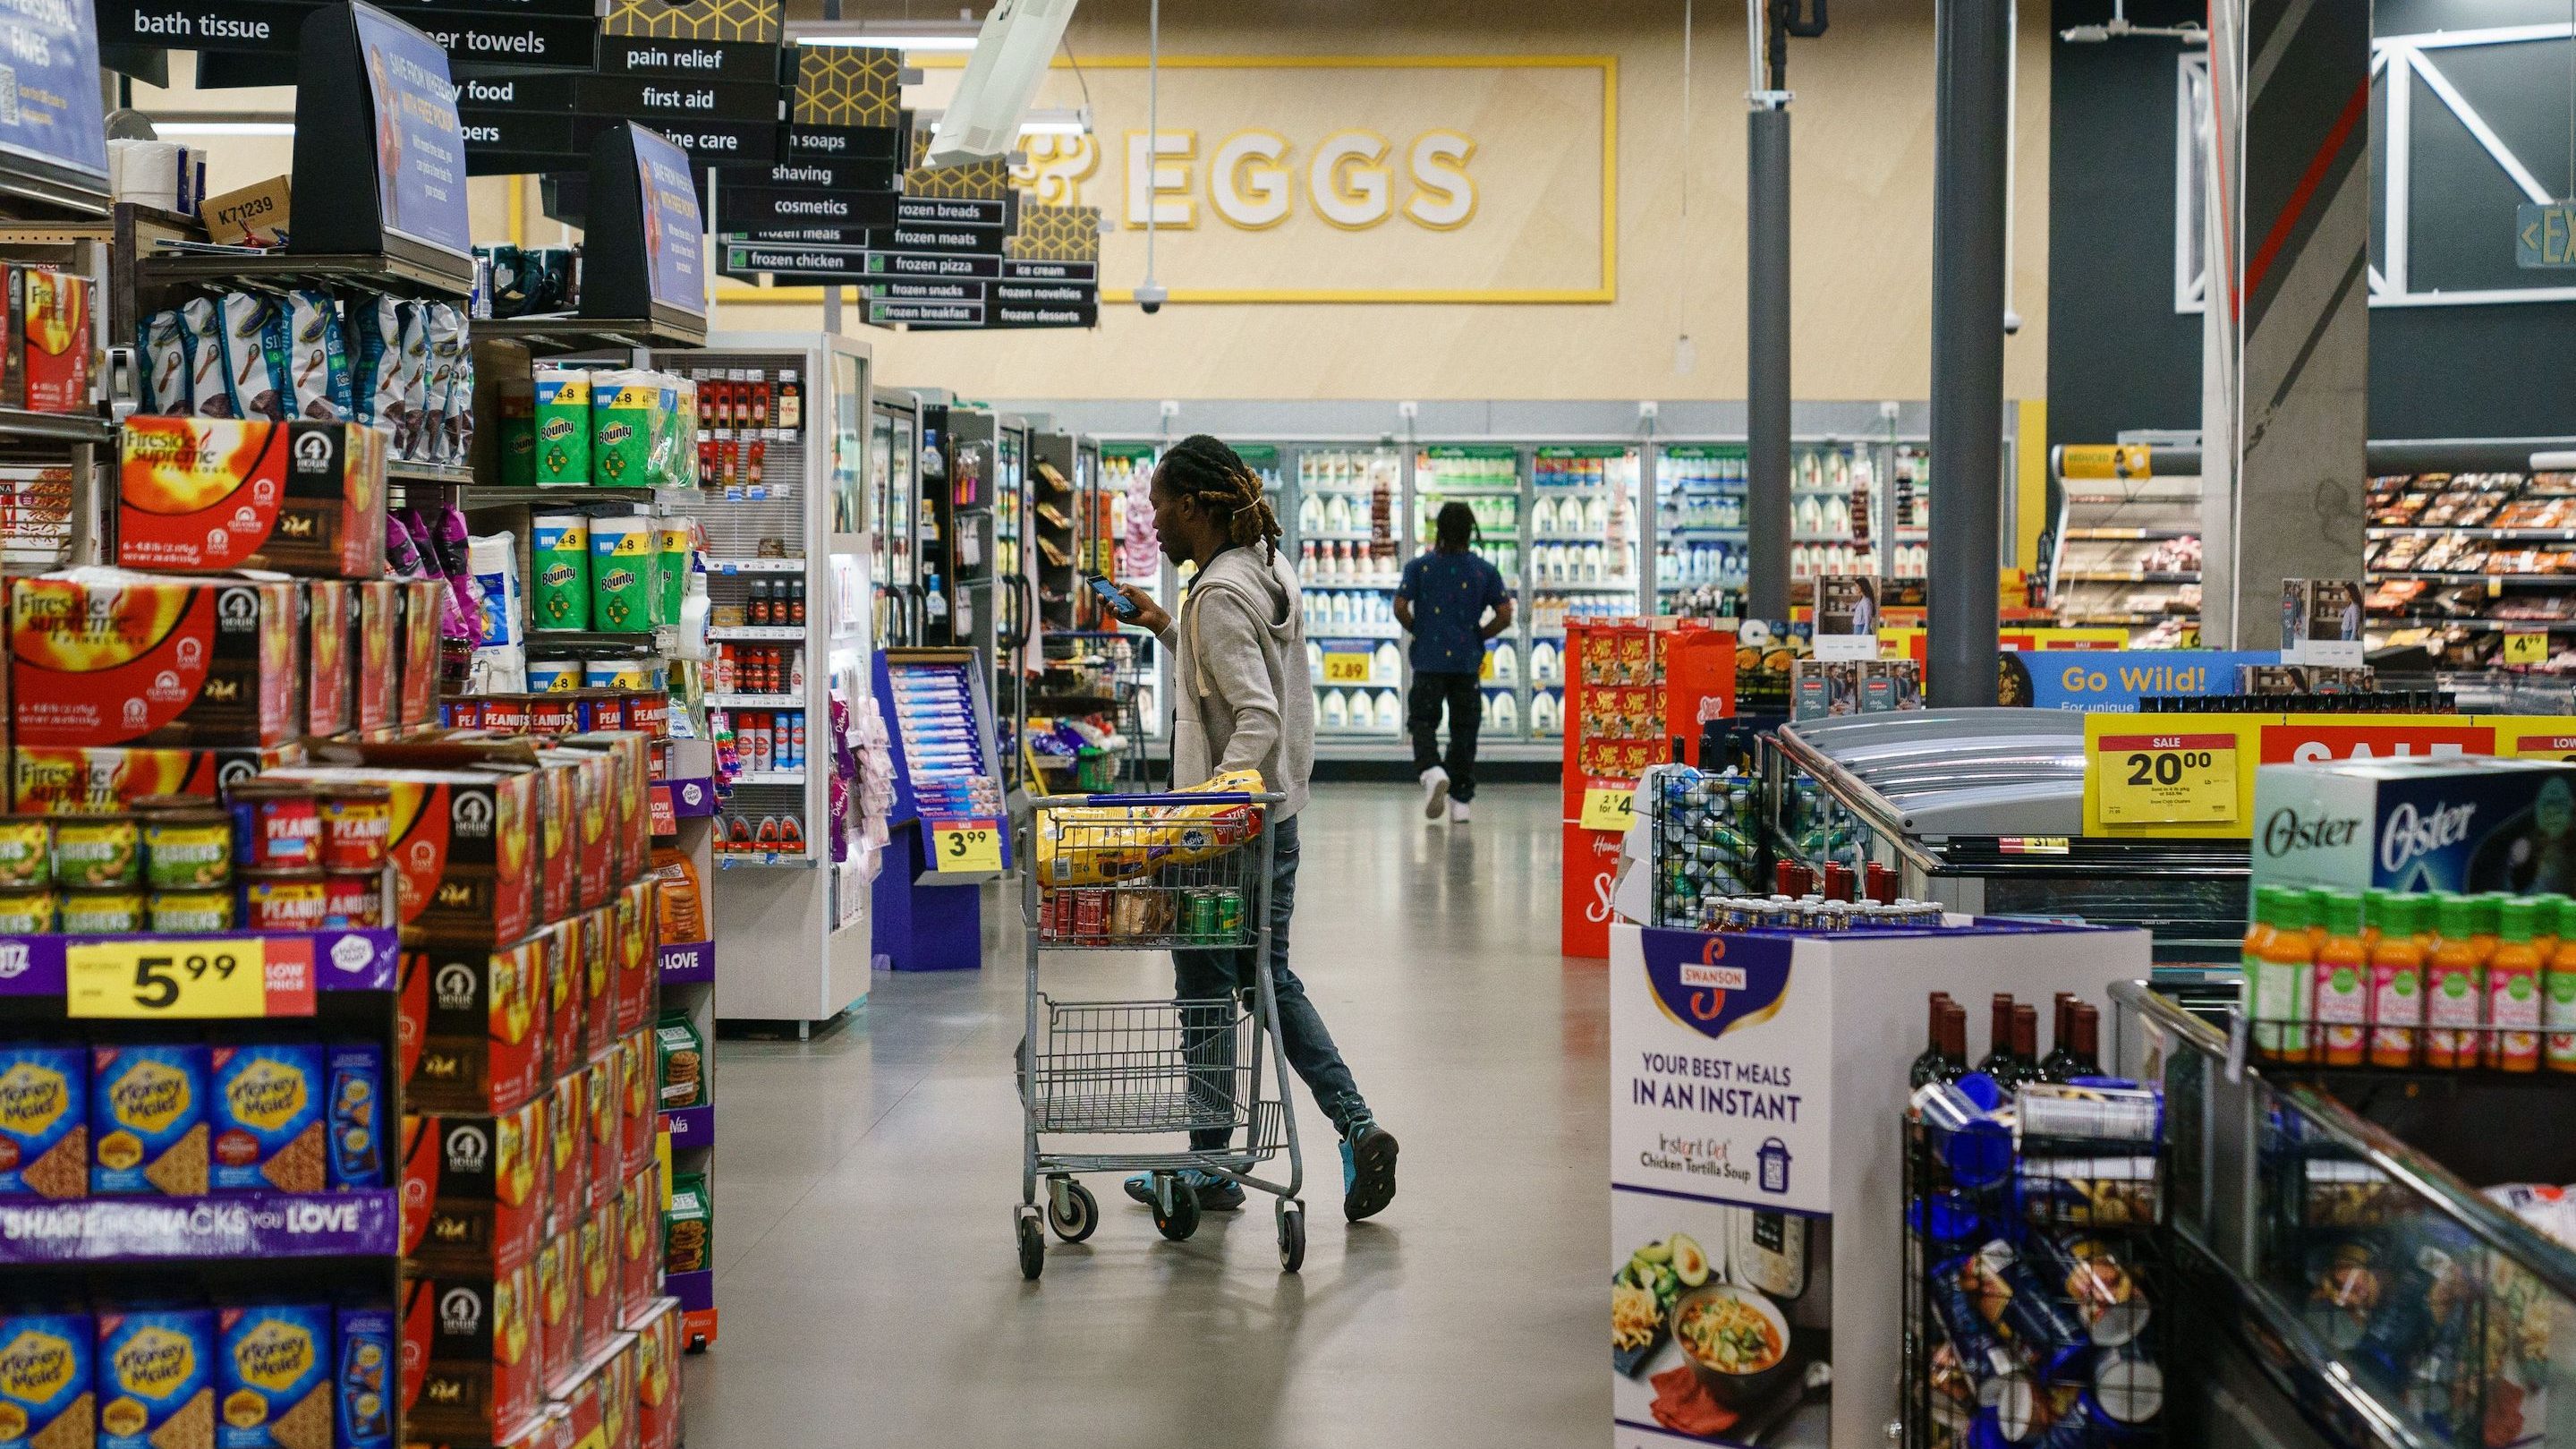 Buy now, pay later' for groceries? More shoppers are using it to